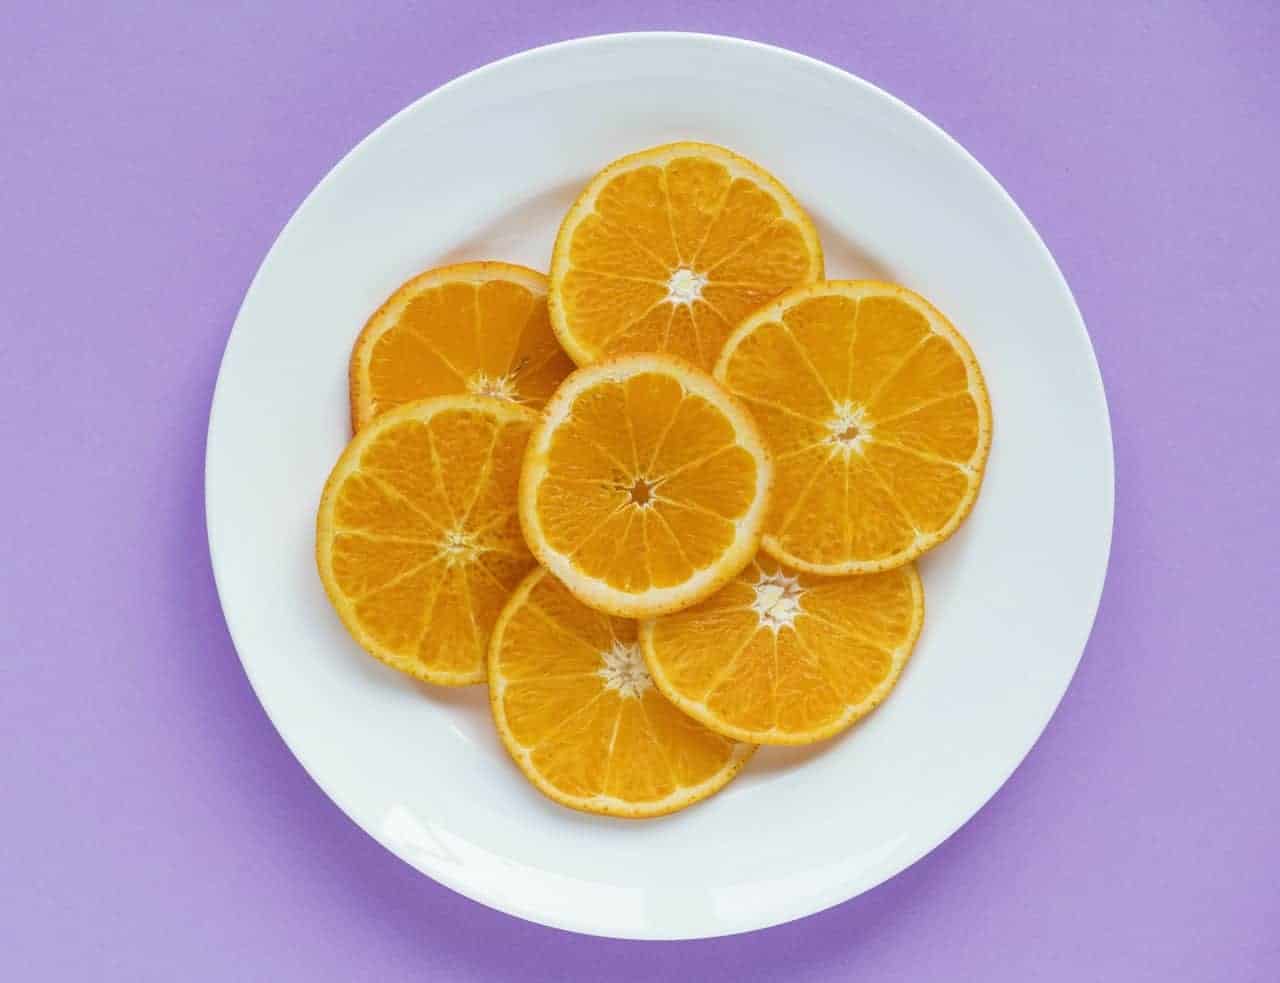 Oranges For Skin: 11 Effective Homemade Face Masks For Girls Who Want Glowing Skin